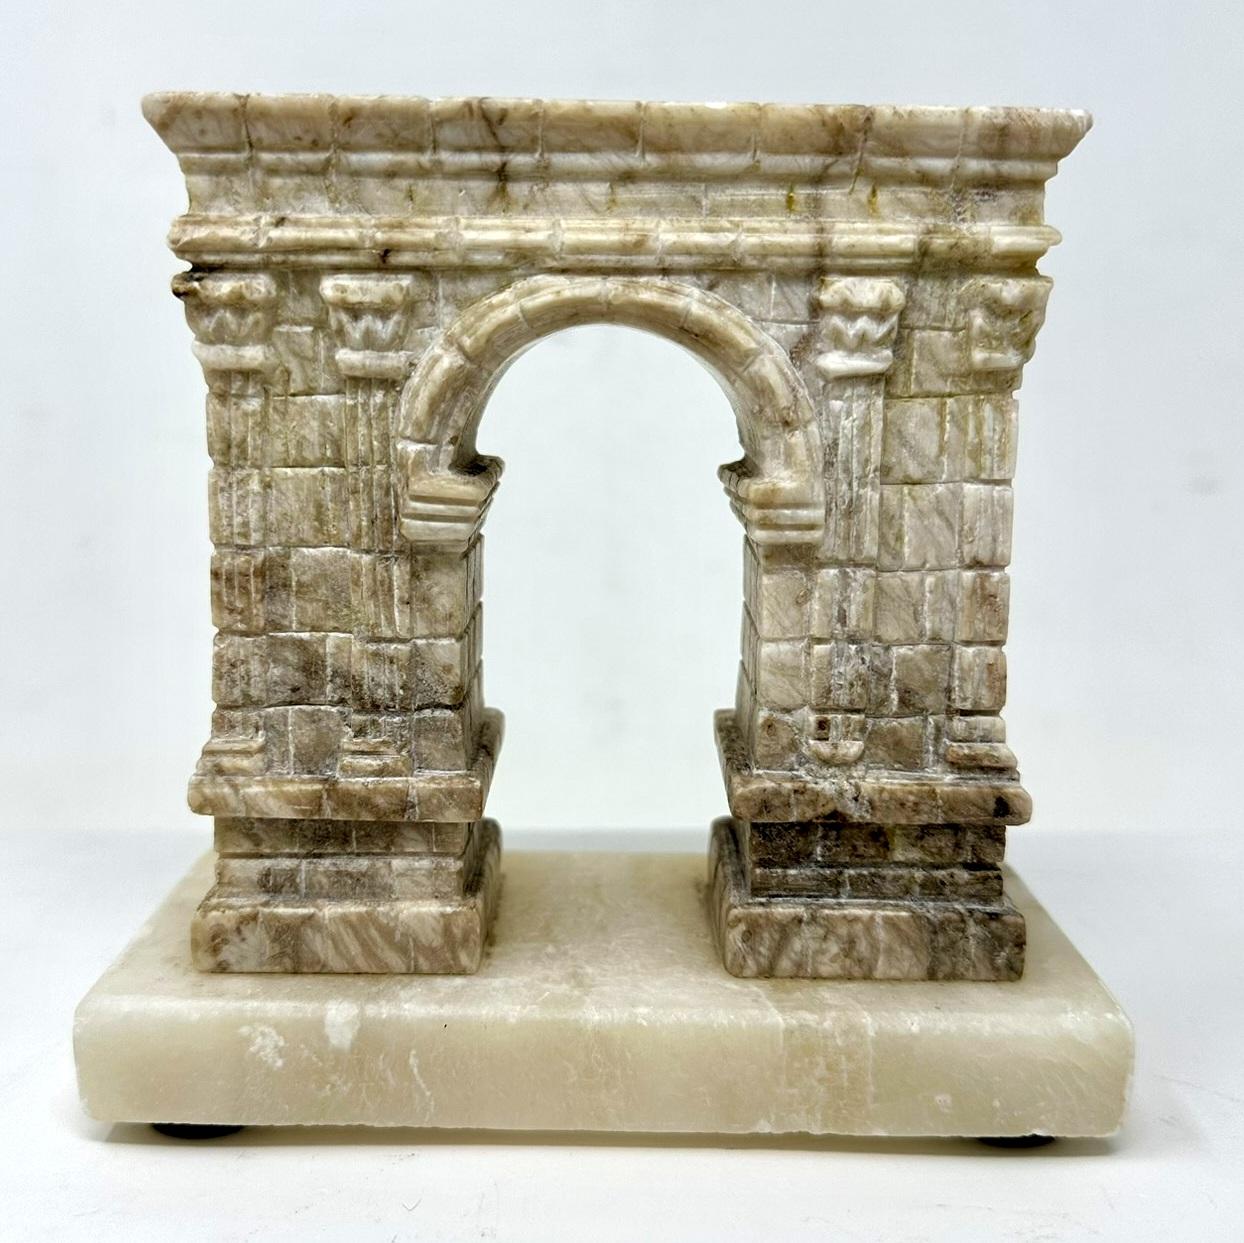 Absolutely Stunning Grand Tour Hand Carved example of the architectural model of the Arc de Triomphe in Paris, of seldom found generous proportions. Late Nineteenth Century. Superbly carved and wonderfully detailed with a pinkish brown veining